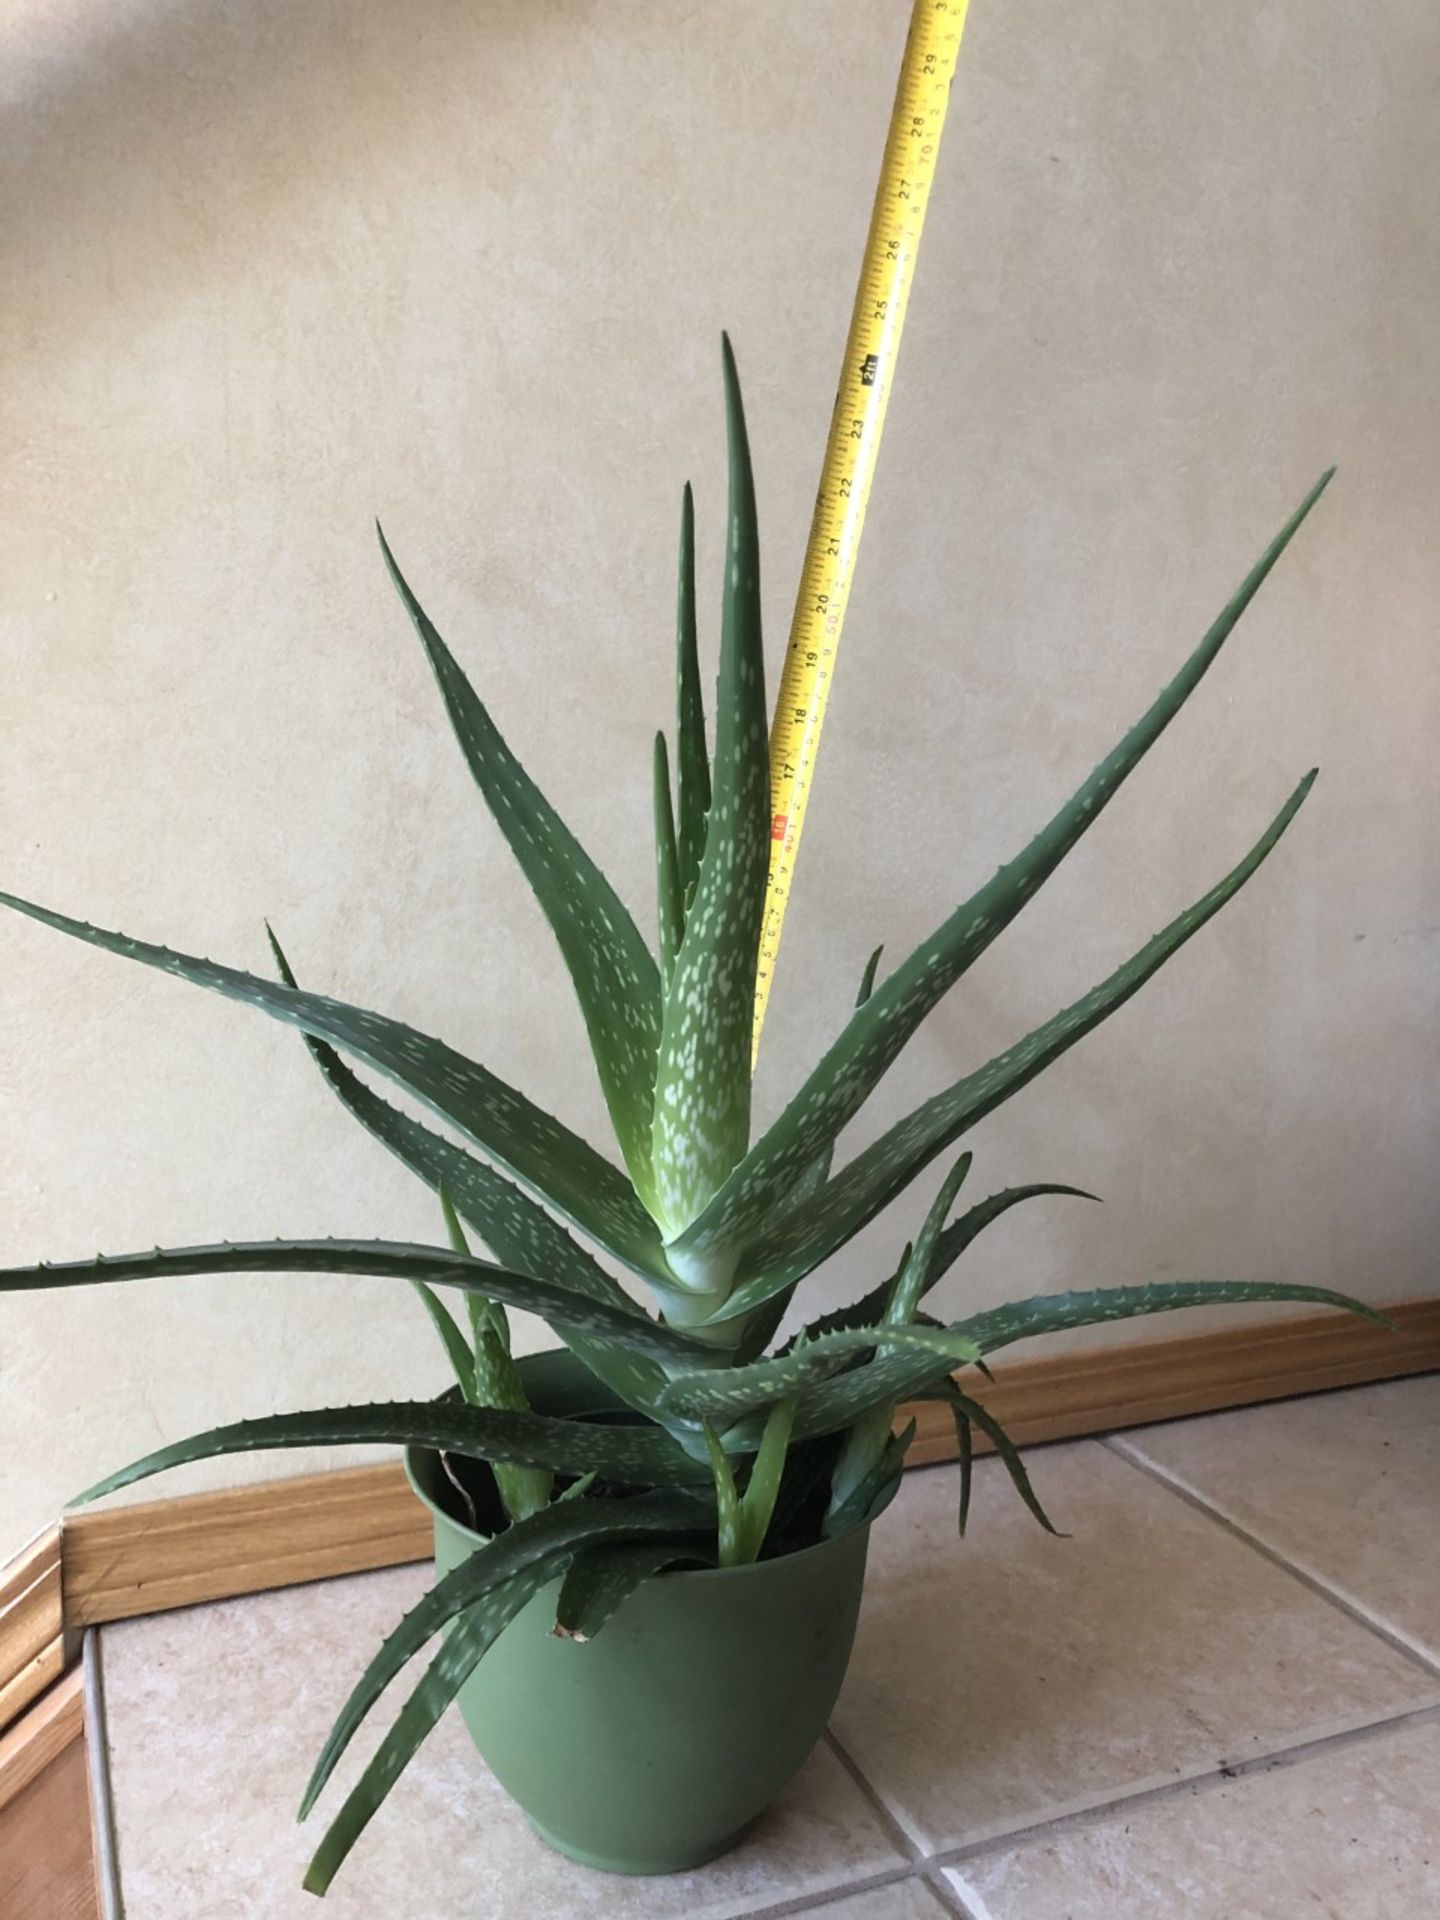 ALOE VERA INDOOR PLANT Height from floor to top of aloe vera plant is 24 inches. Donated by: